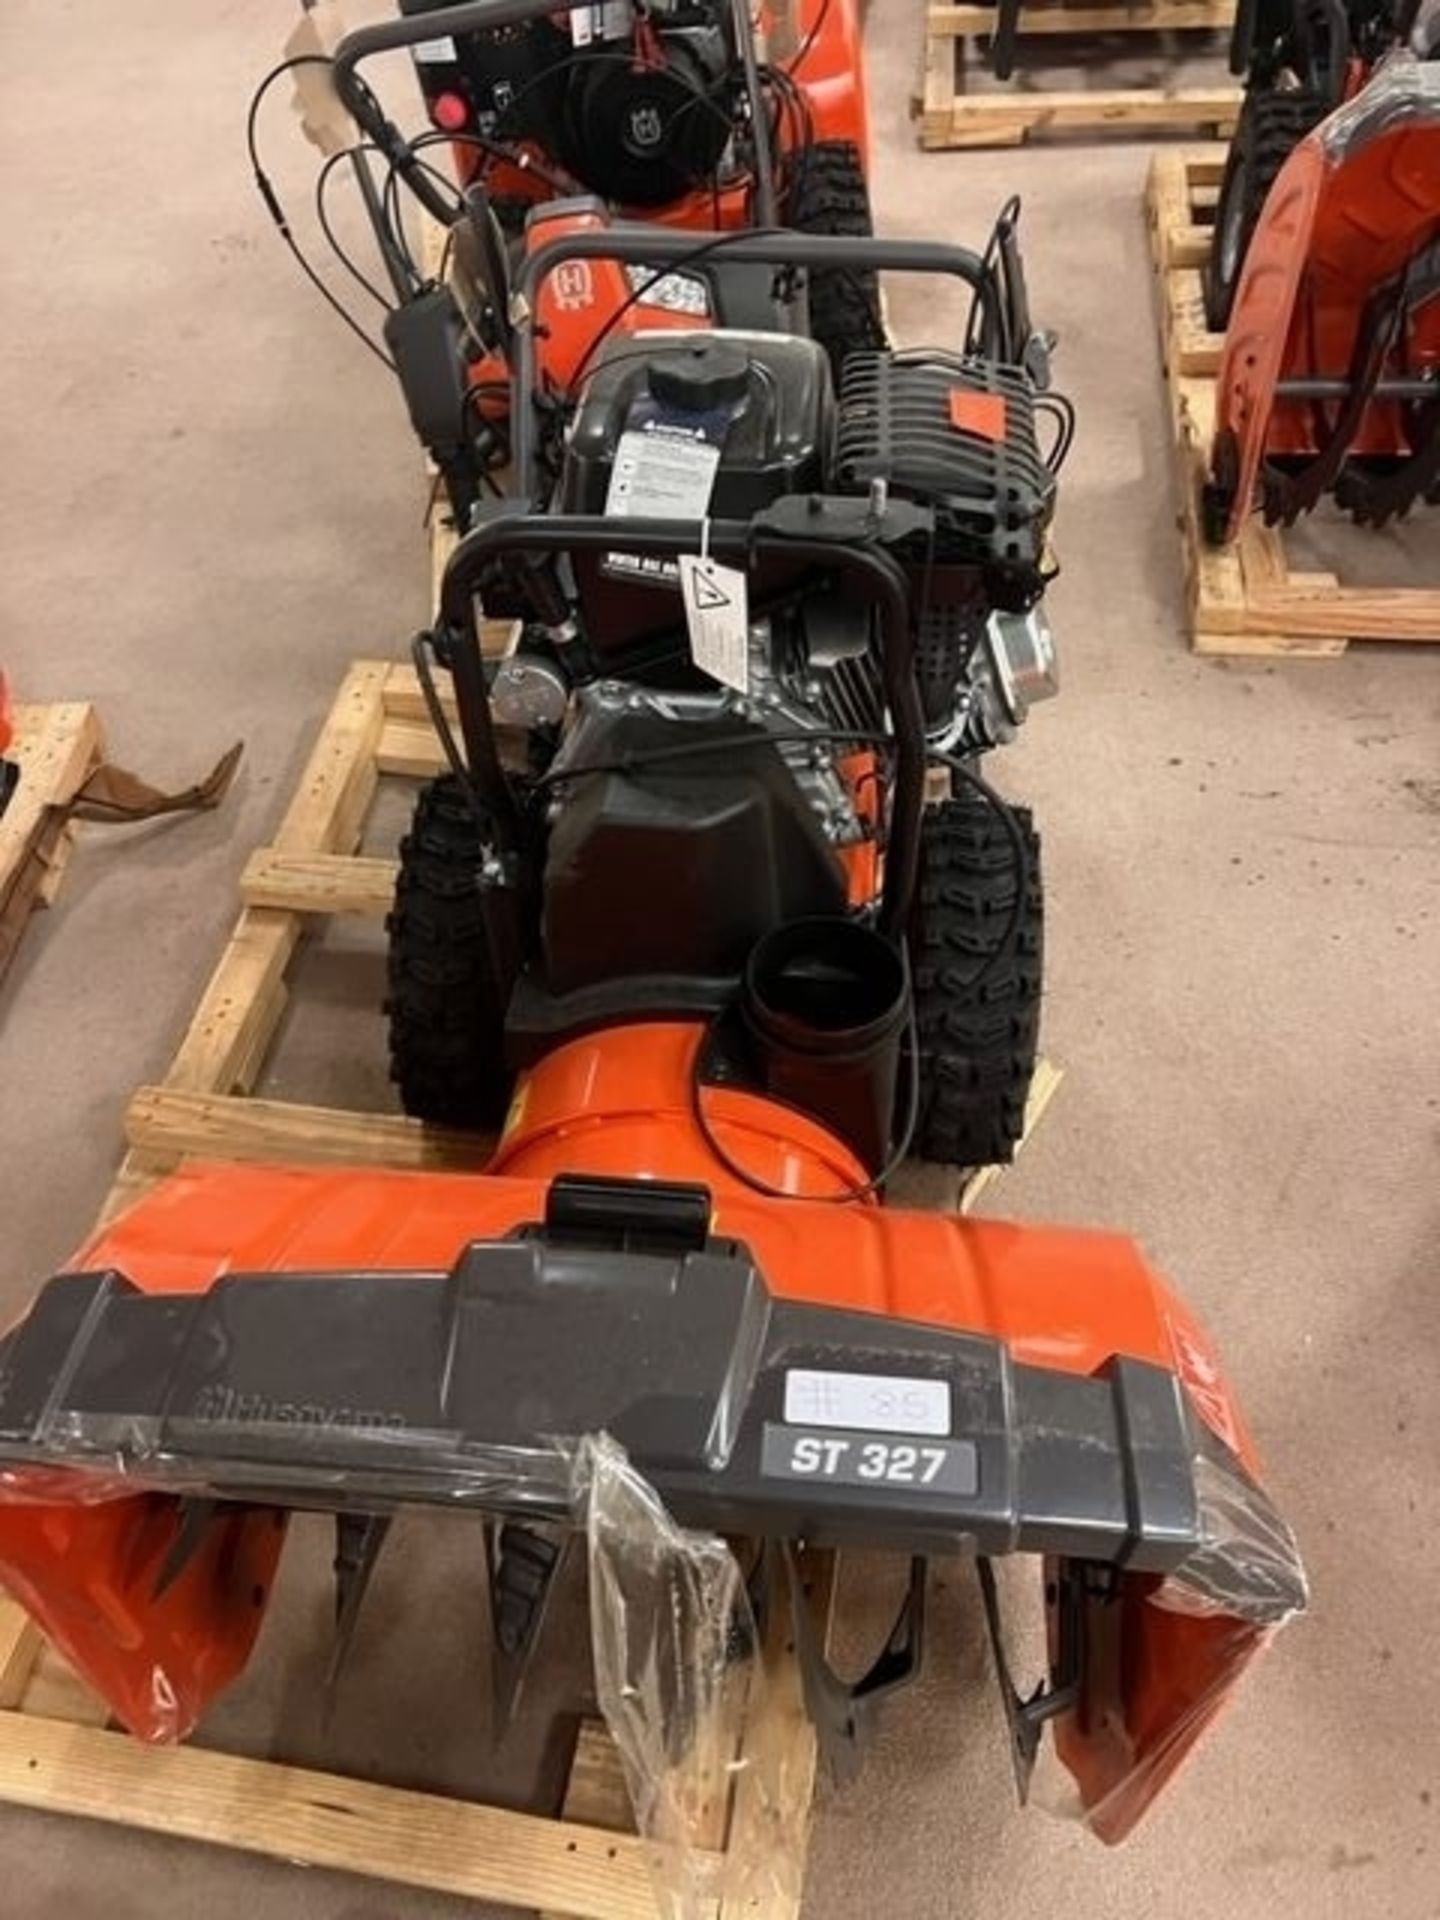 Husqvarna ST 327 Self Propelled Snow Blower - Approx. MSRP $1399 - Image 3 of 4